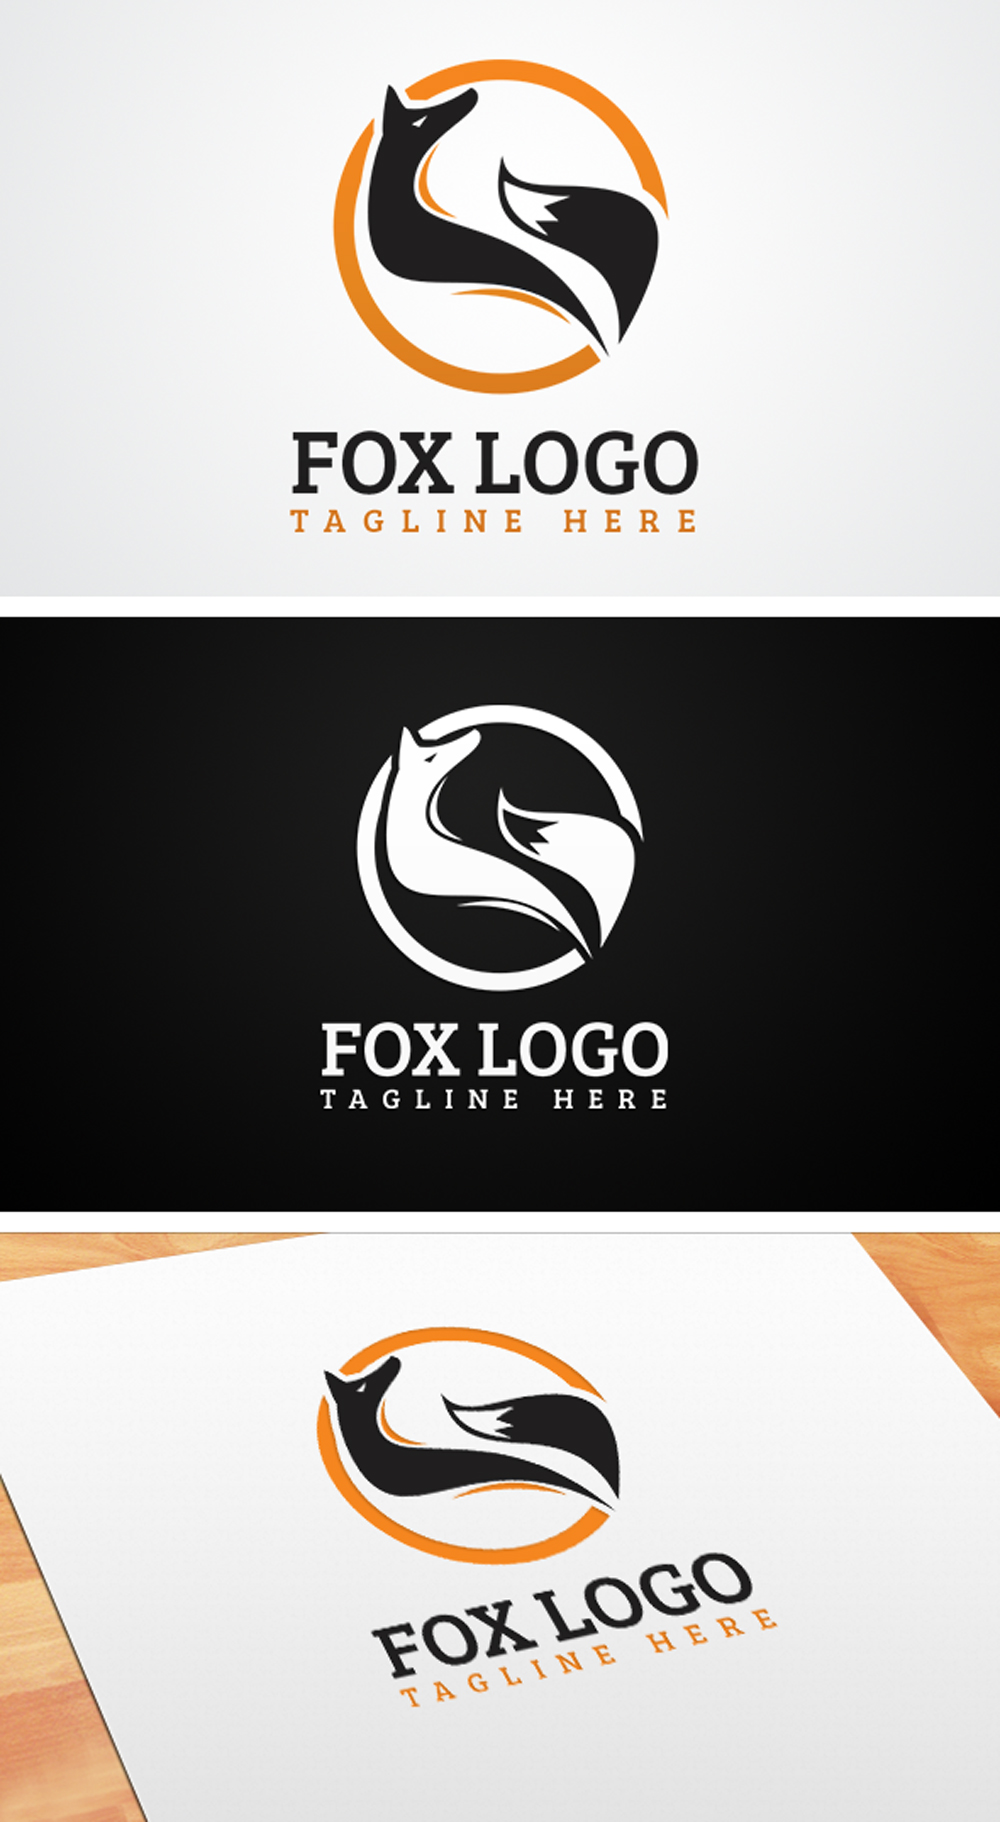 The picture shows the variability of the logo type with a fox.